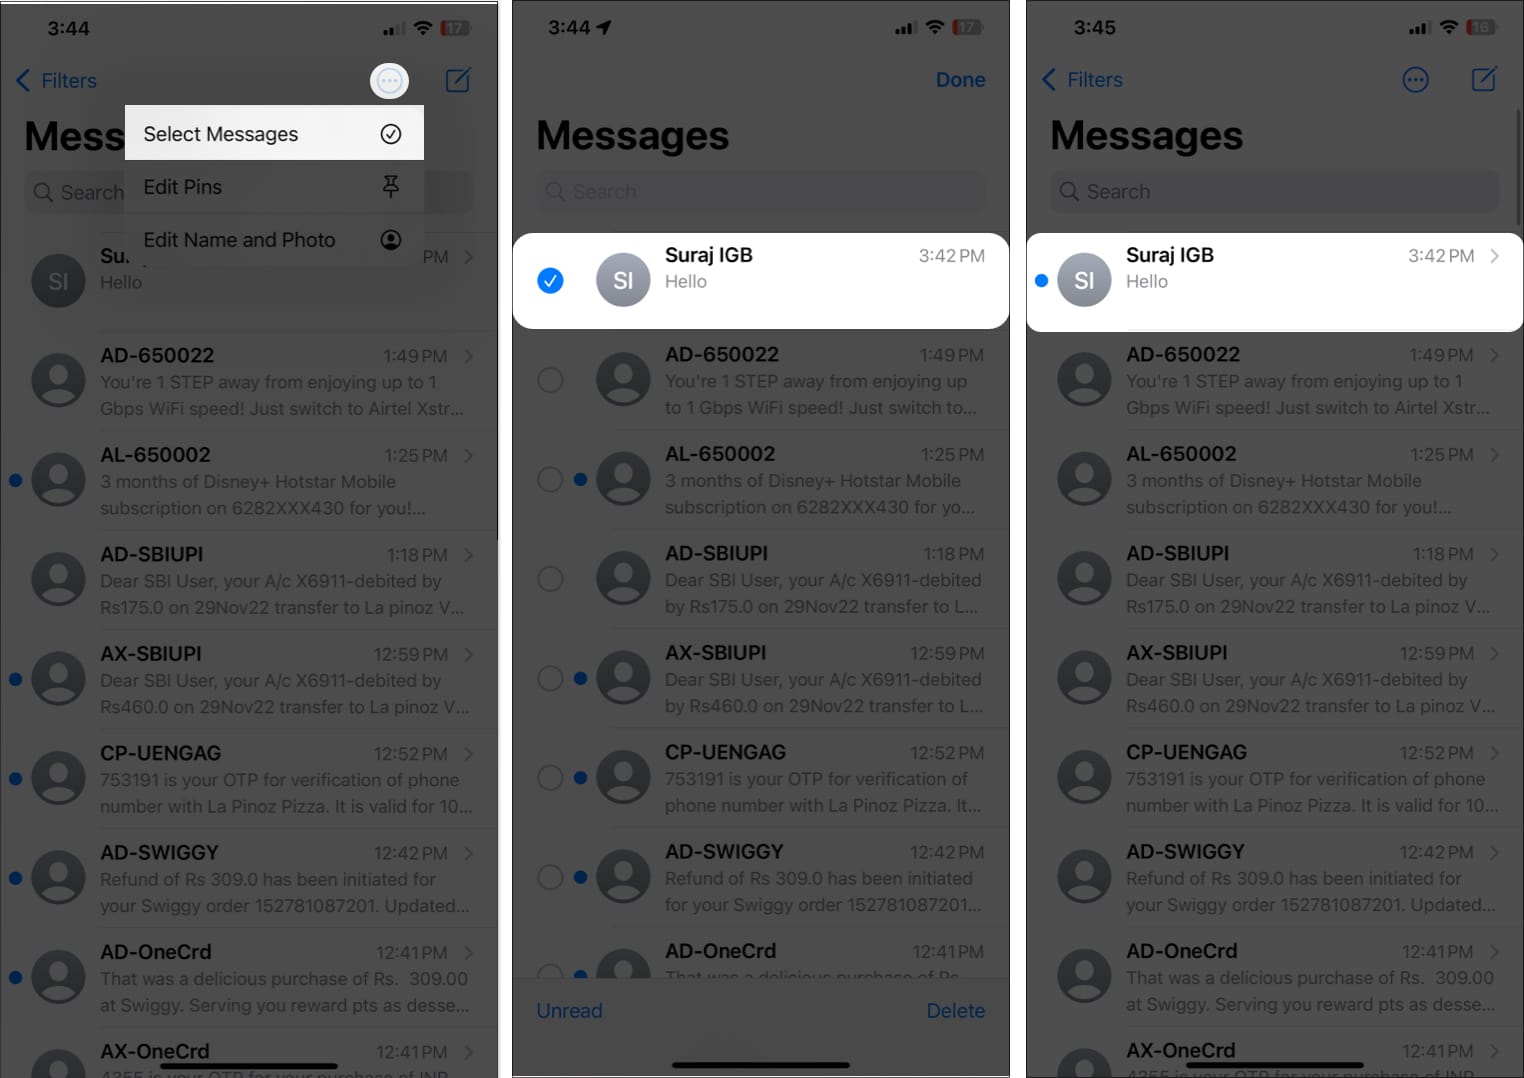 Another way to mark messages unread on iPhone